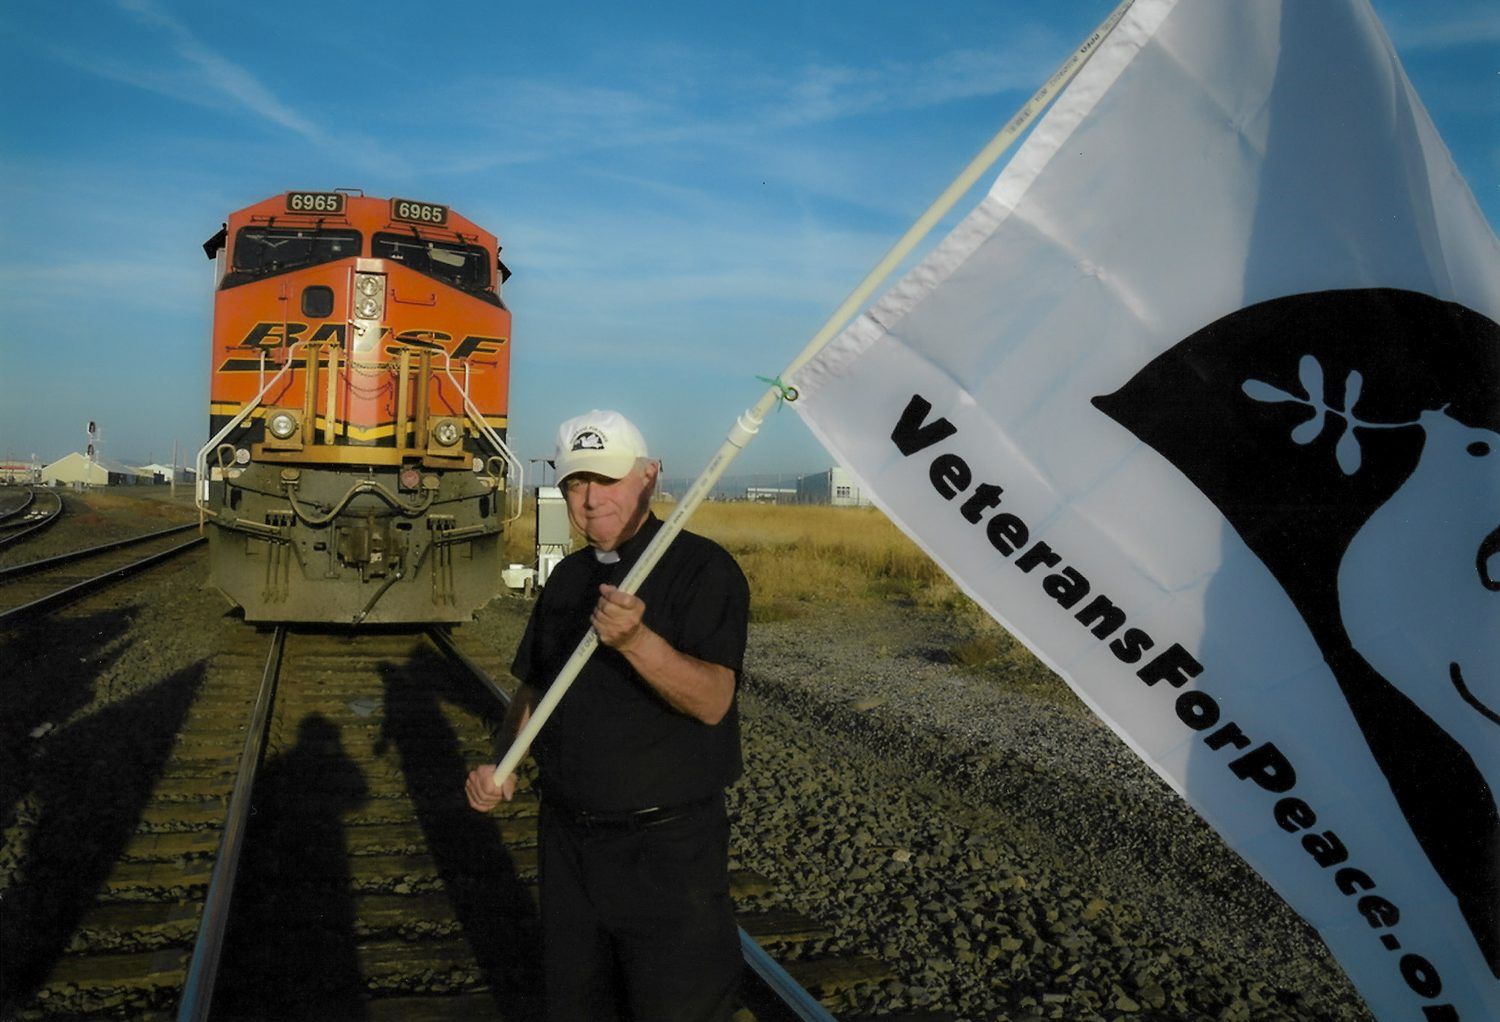 A white man wearing a white ball cap and a short-sleeved black shirt with a reverend's collar stands on a railroad track with an orange train close behind him. He is holding a white flag that says 'VeteransForPeace.org.'